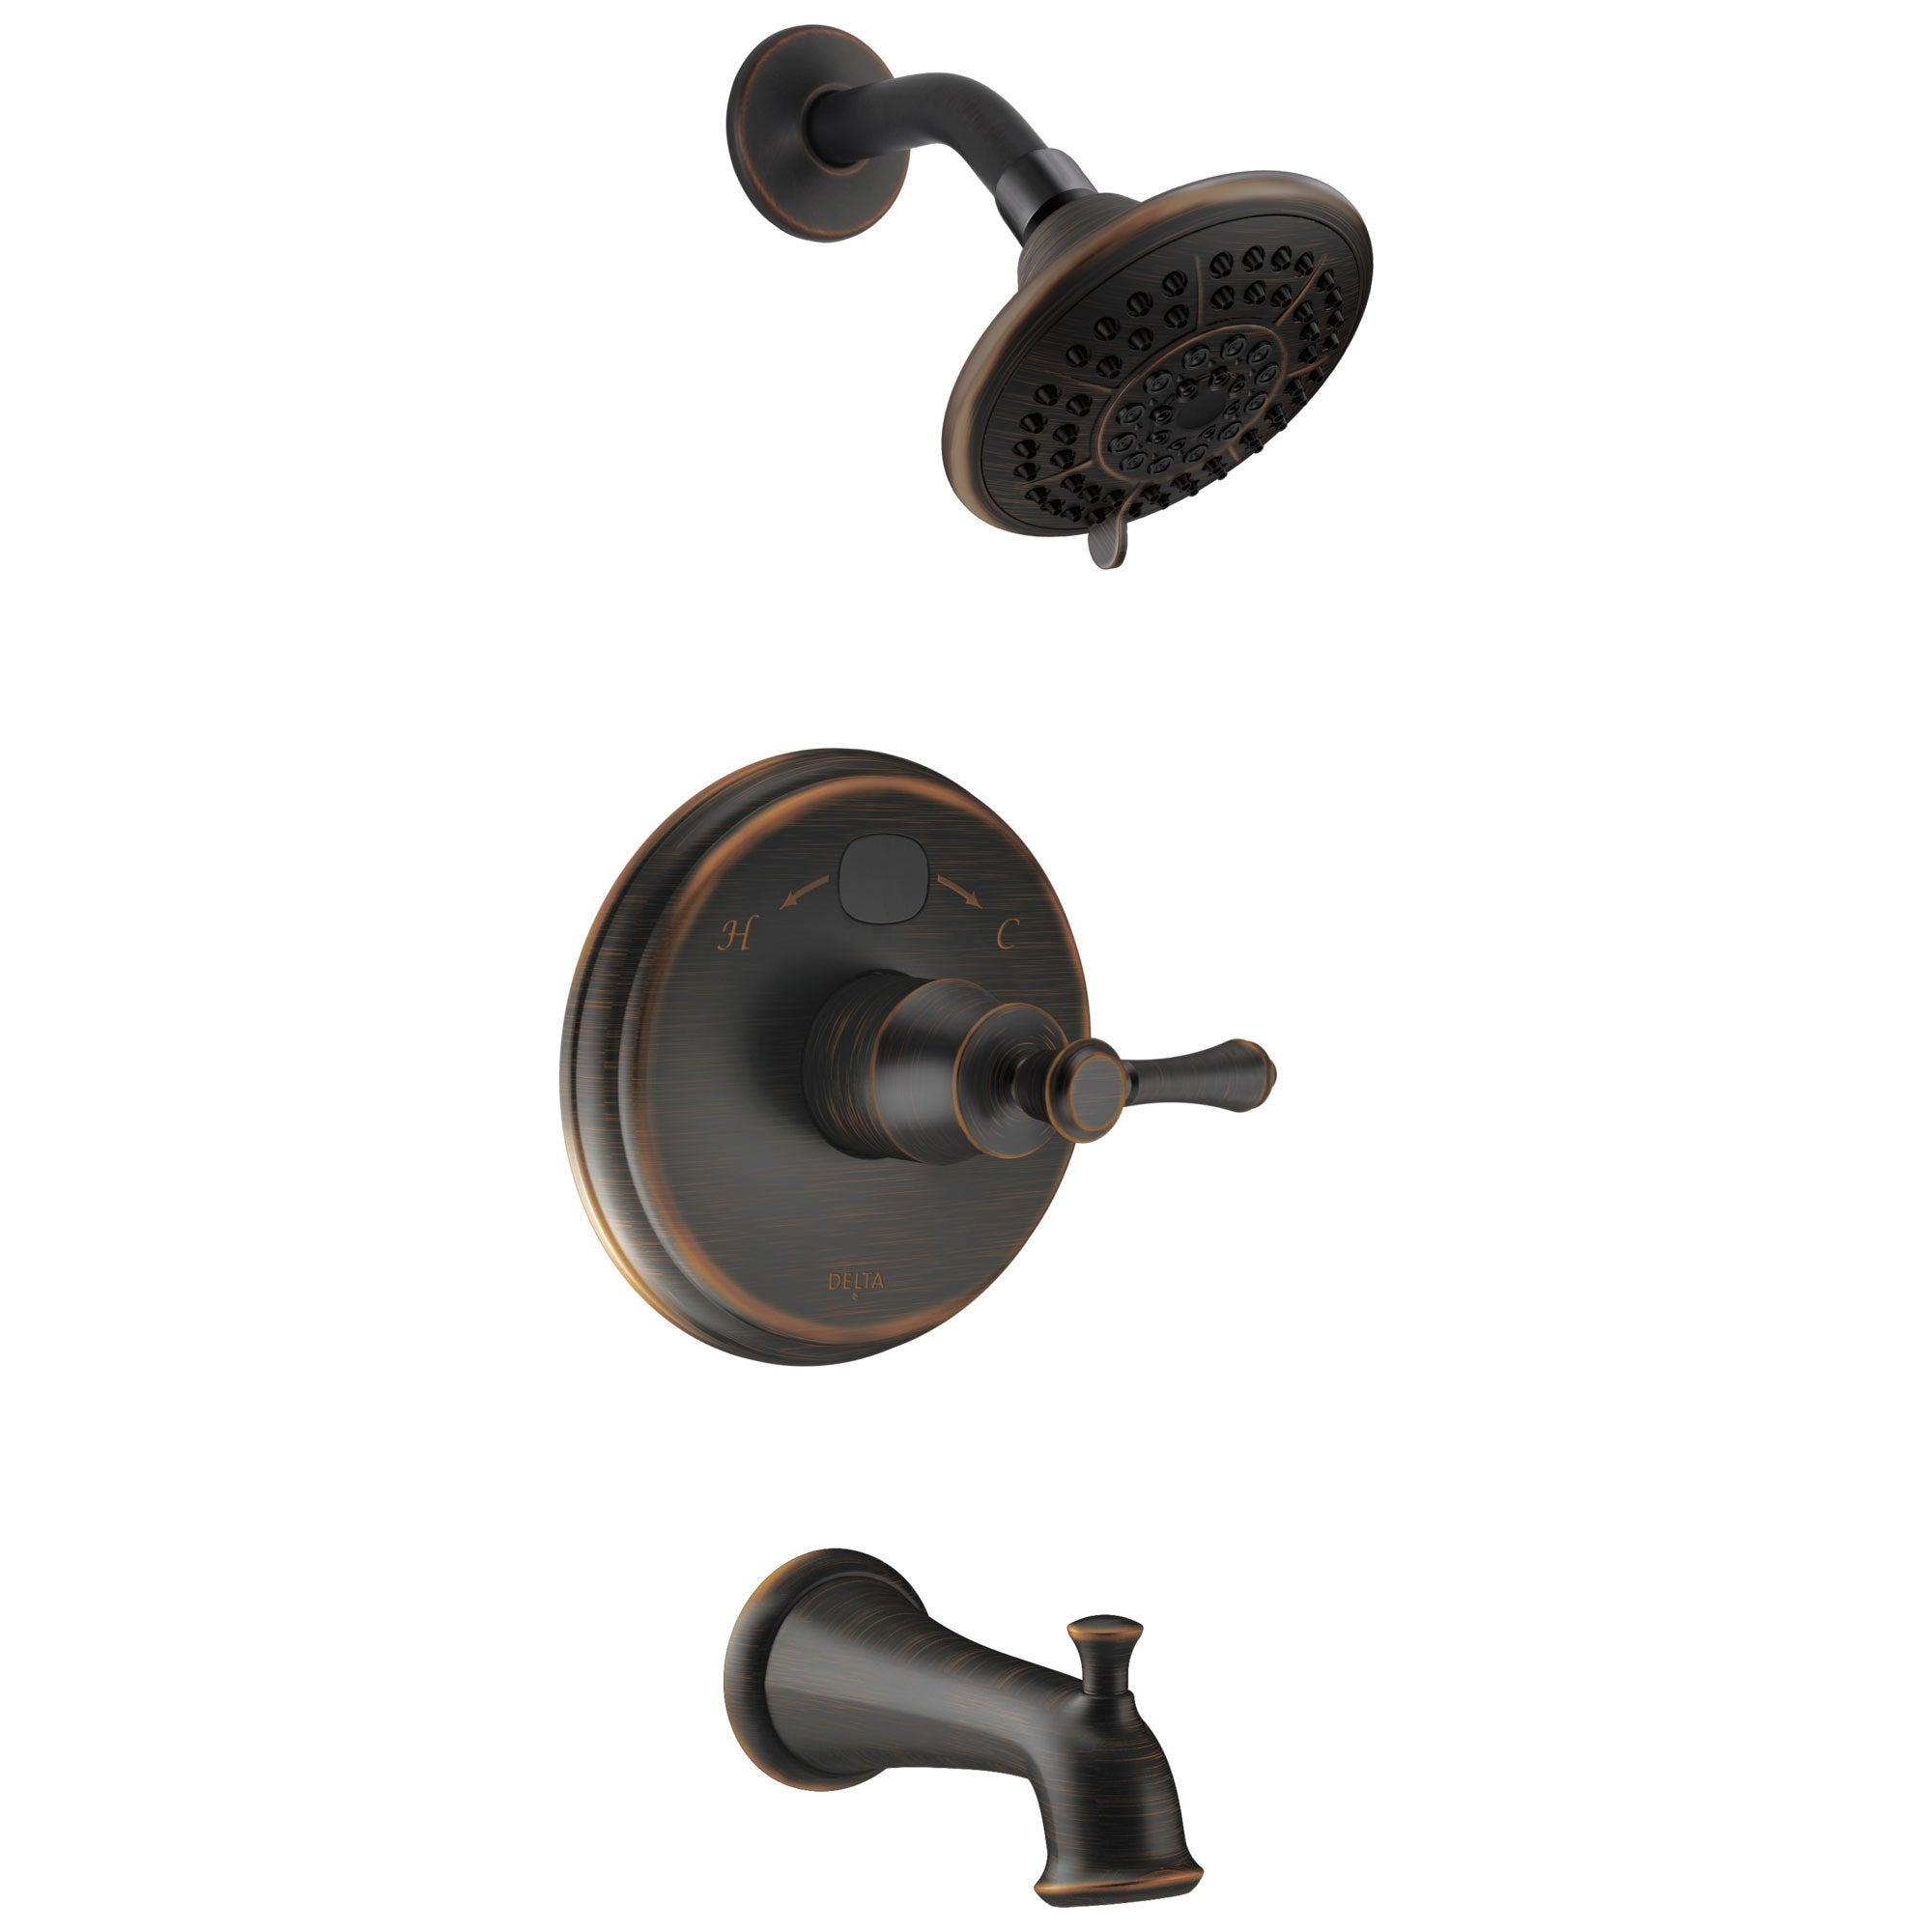 Delta Venetian Bronze MultiChoice 14 Series Temp2O Digital One Handle Tub and Shower Combination Faucet Complete item: Trim Kit and Rough-in Valve Included 732768